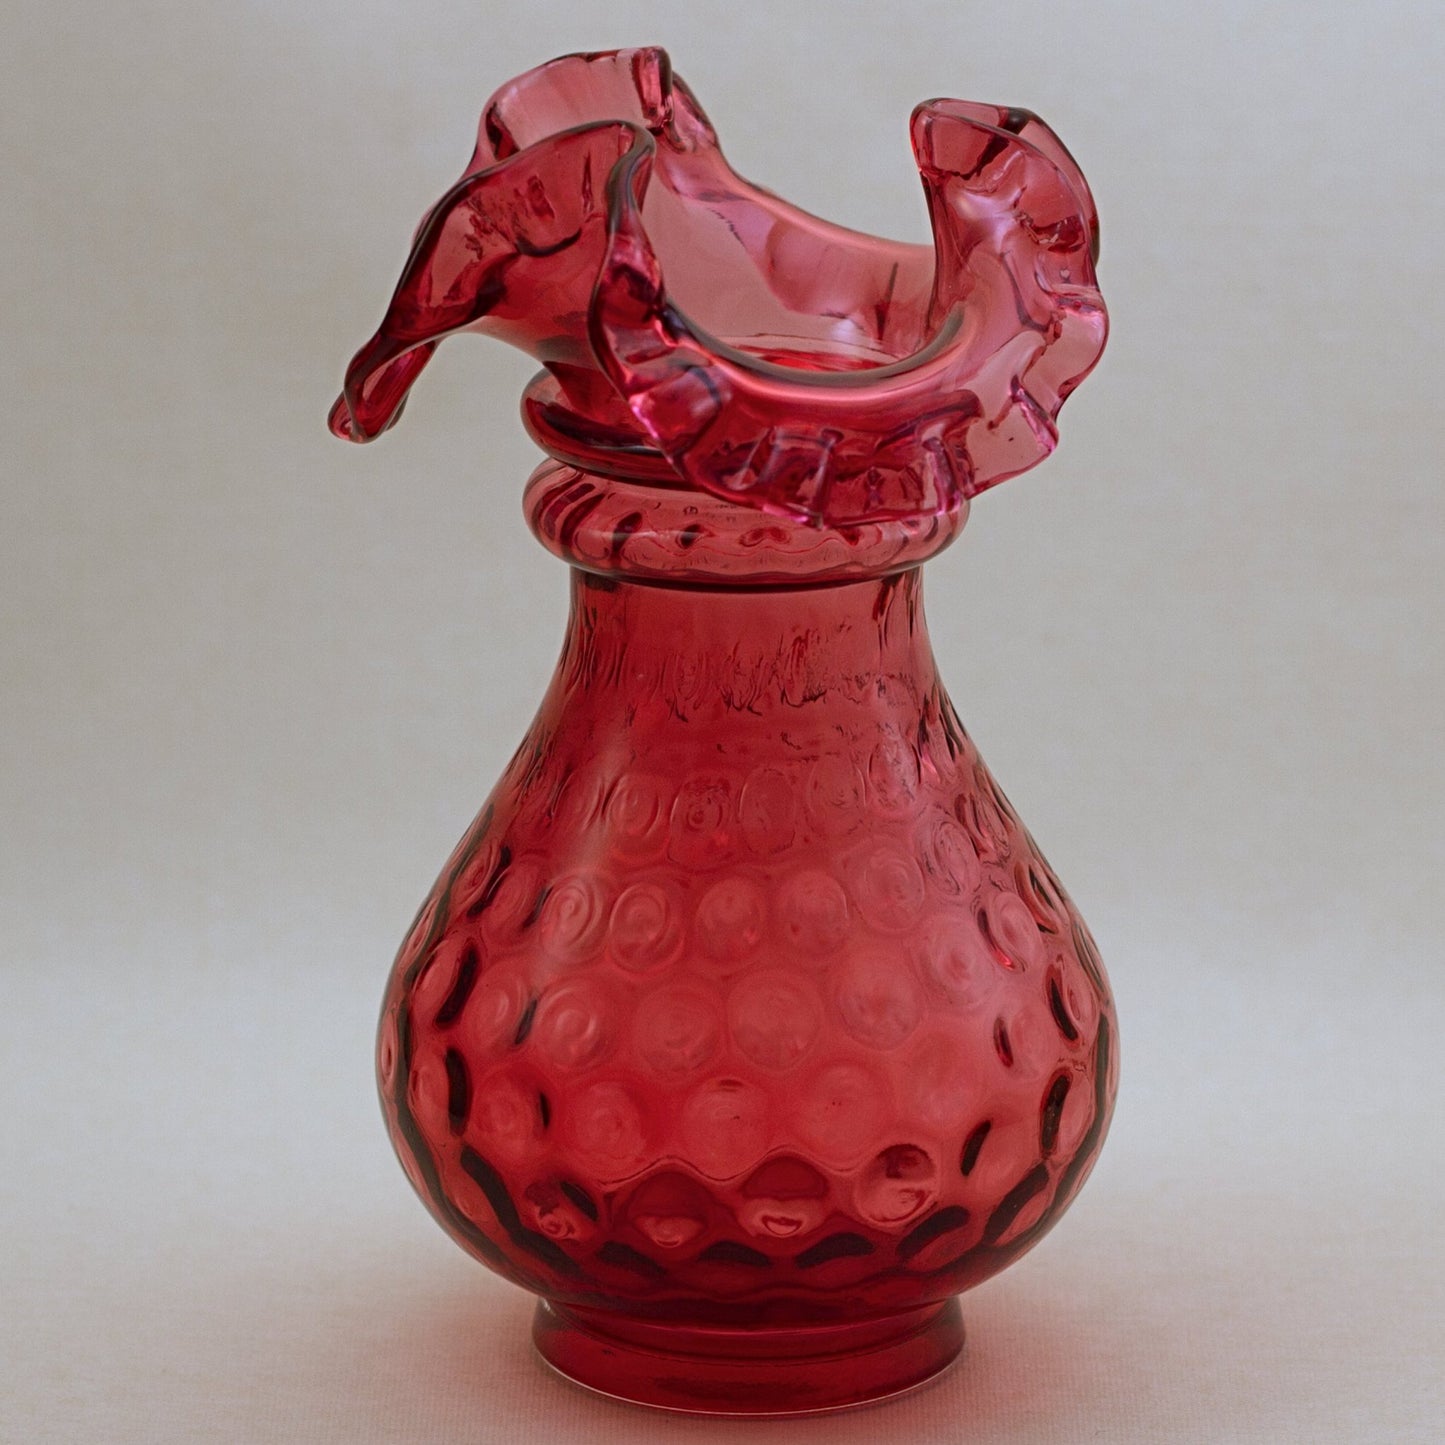 FENTON CRANBERRY ART GLASS Two-Ring Vase with Ruffled Edge in Ruby Overlay & Polka Dot Pattern Circa 1950s